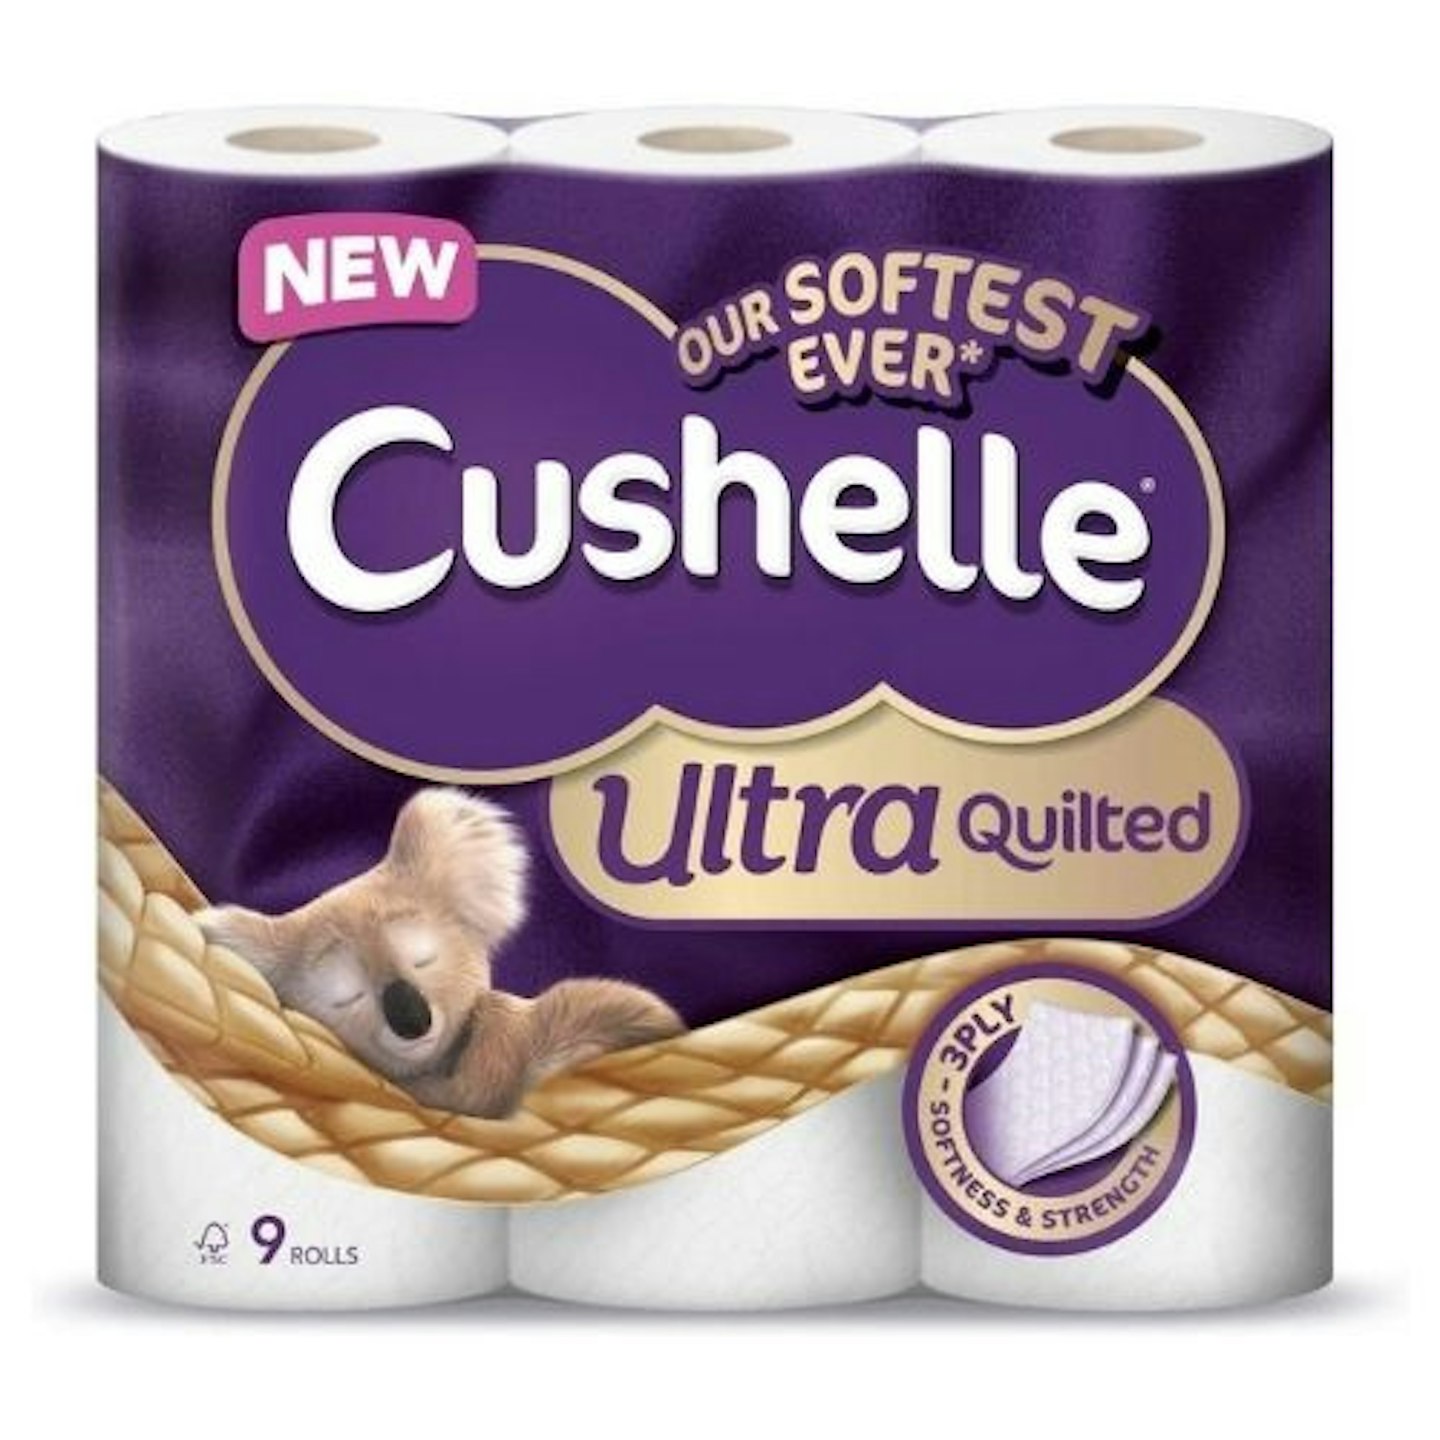 Cushelle Quilted Toilet Roll 3Ply - Pack of 45 Rolls